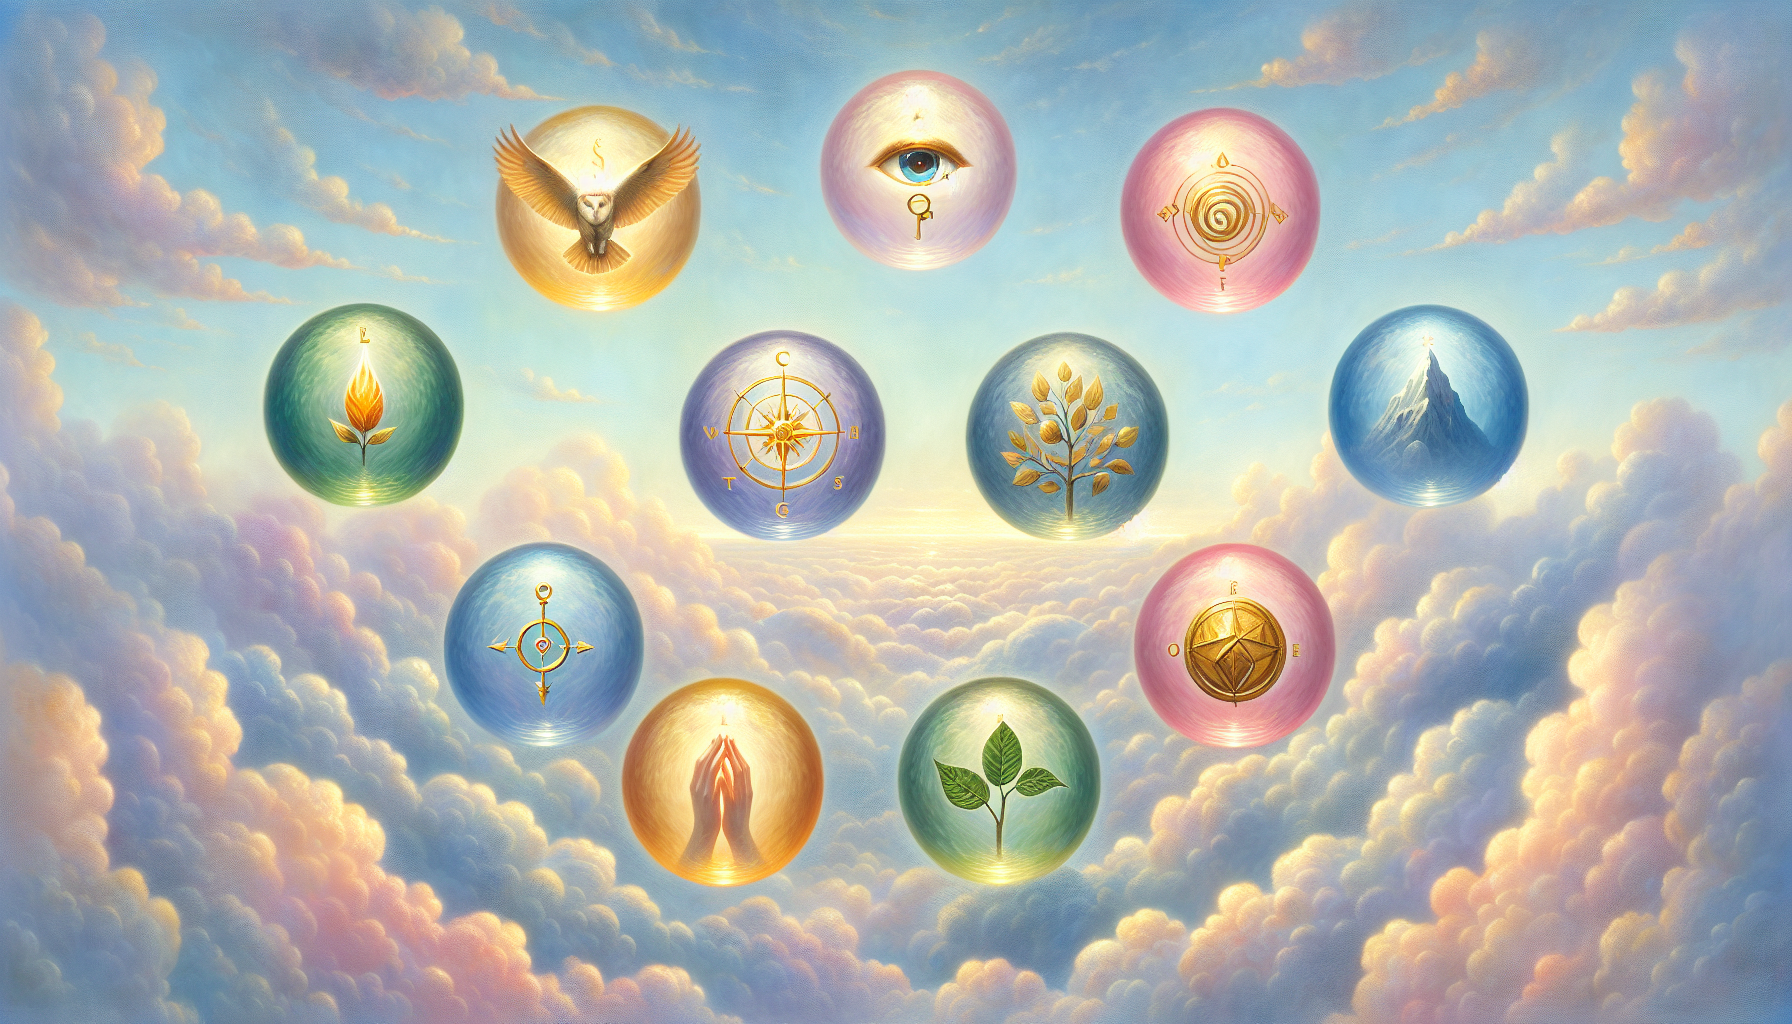 Seven gifts of the Holy Spirit depicted as ethereal symbols